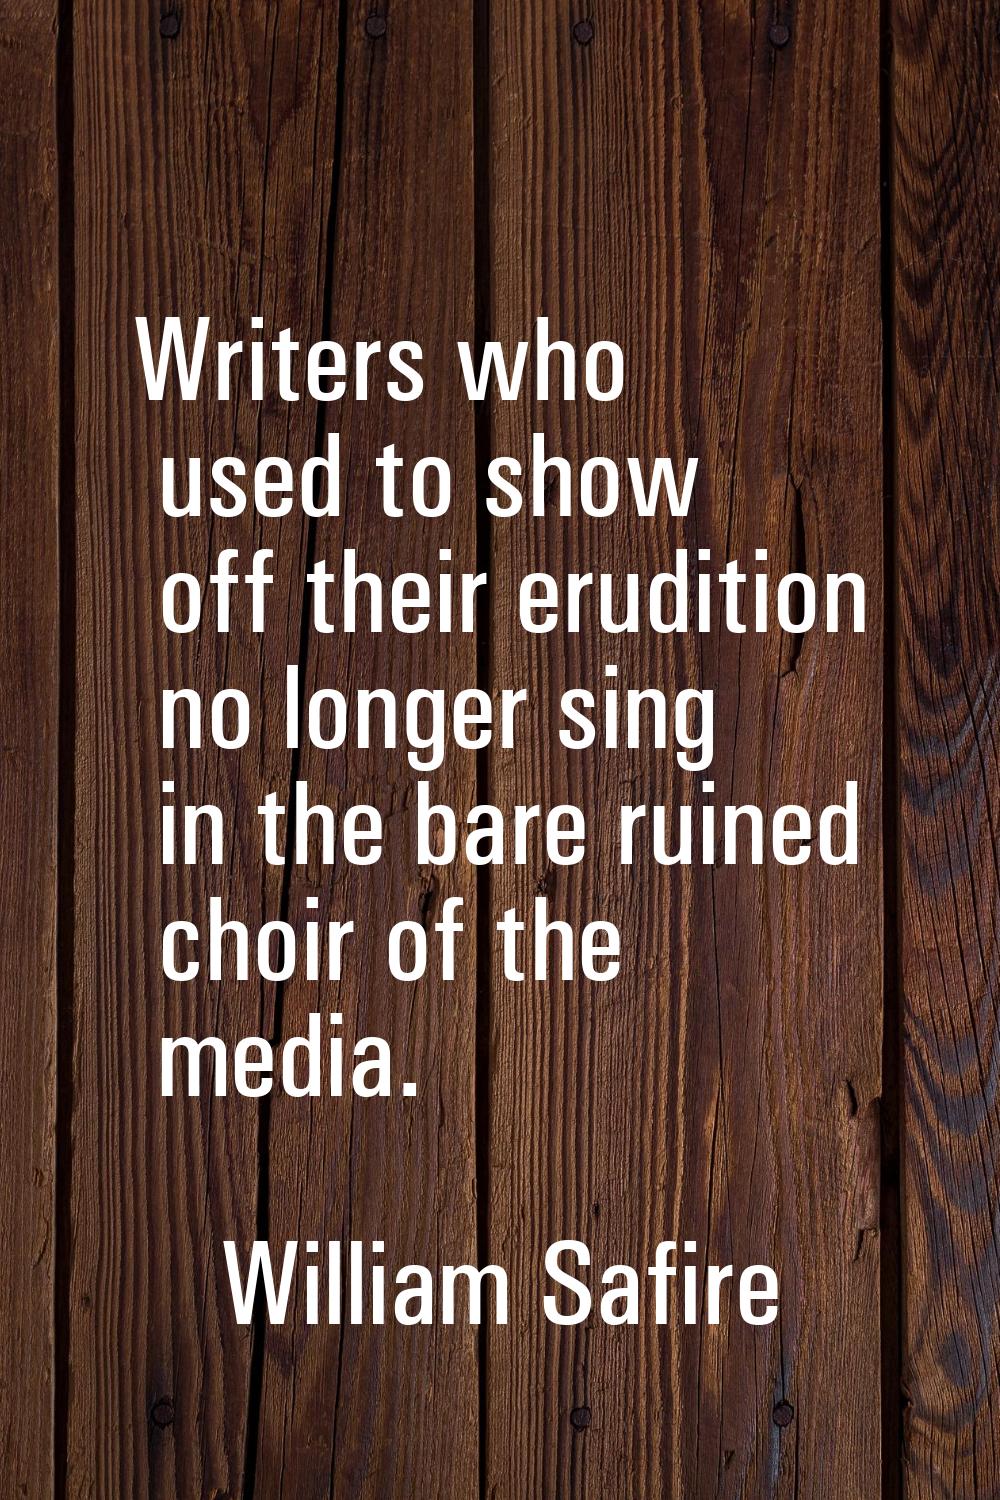 Writers who used to show off their erudition no longer sing in the bare ruined choir of the media.